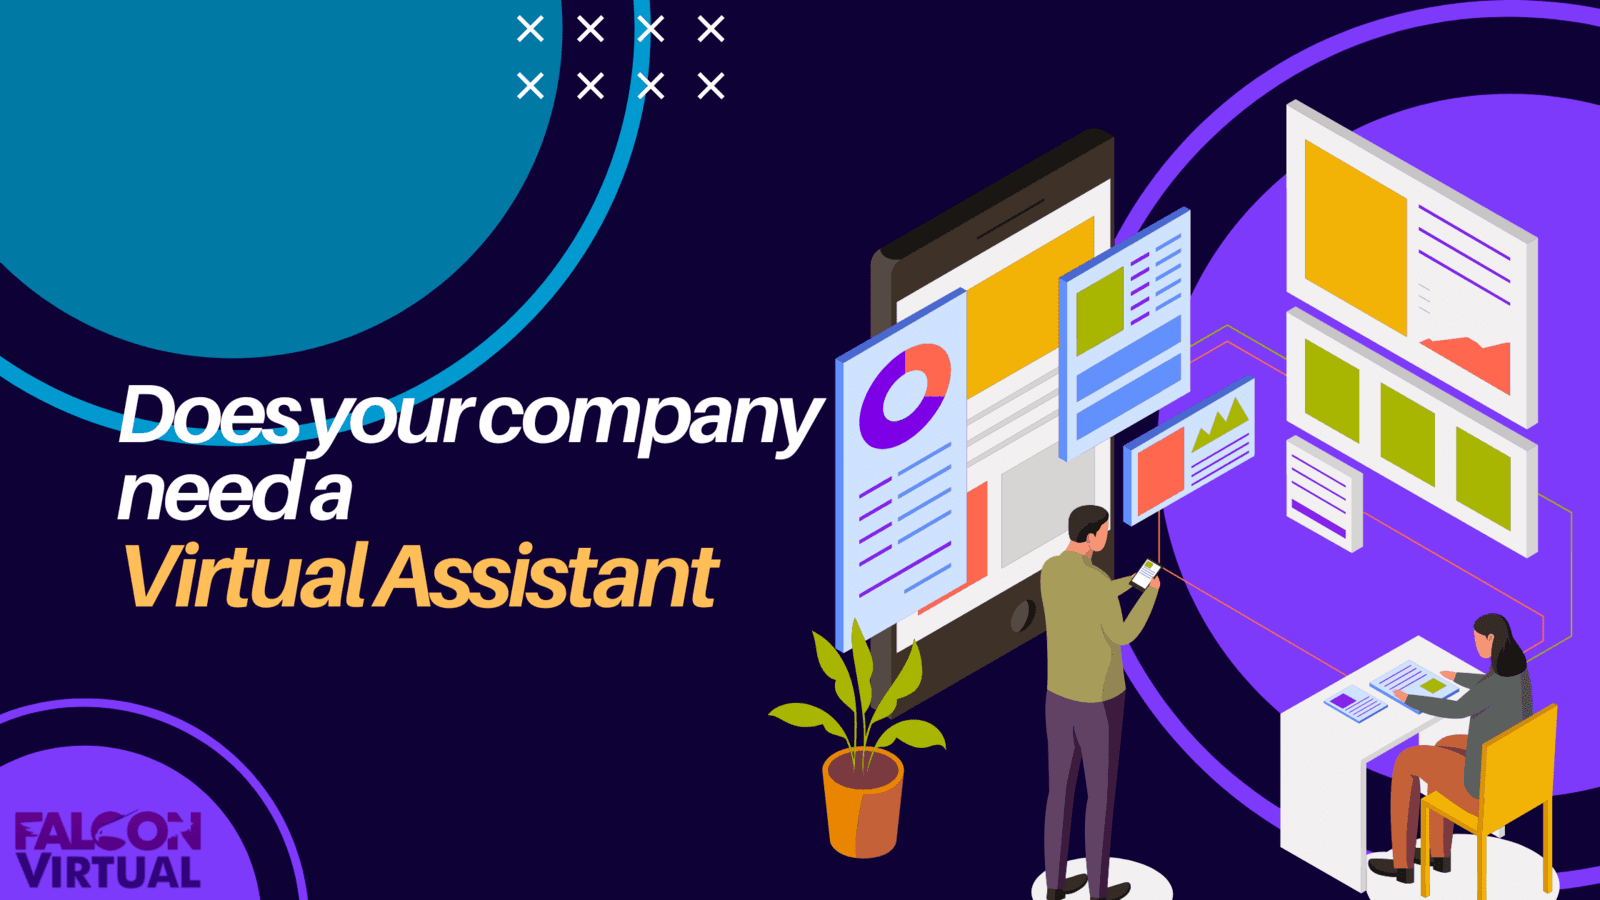 Does Your Company Need a Virtual Assistant?